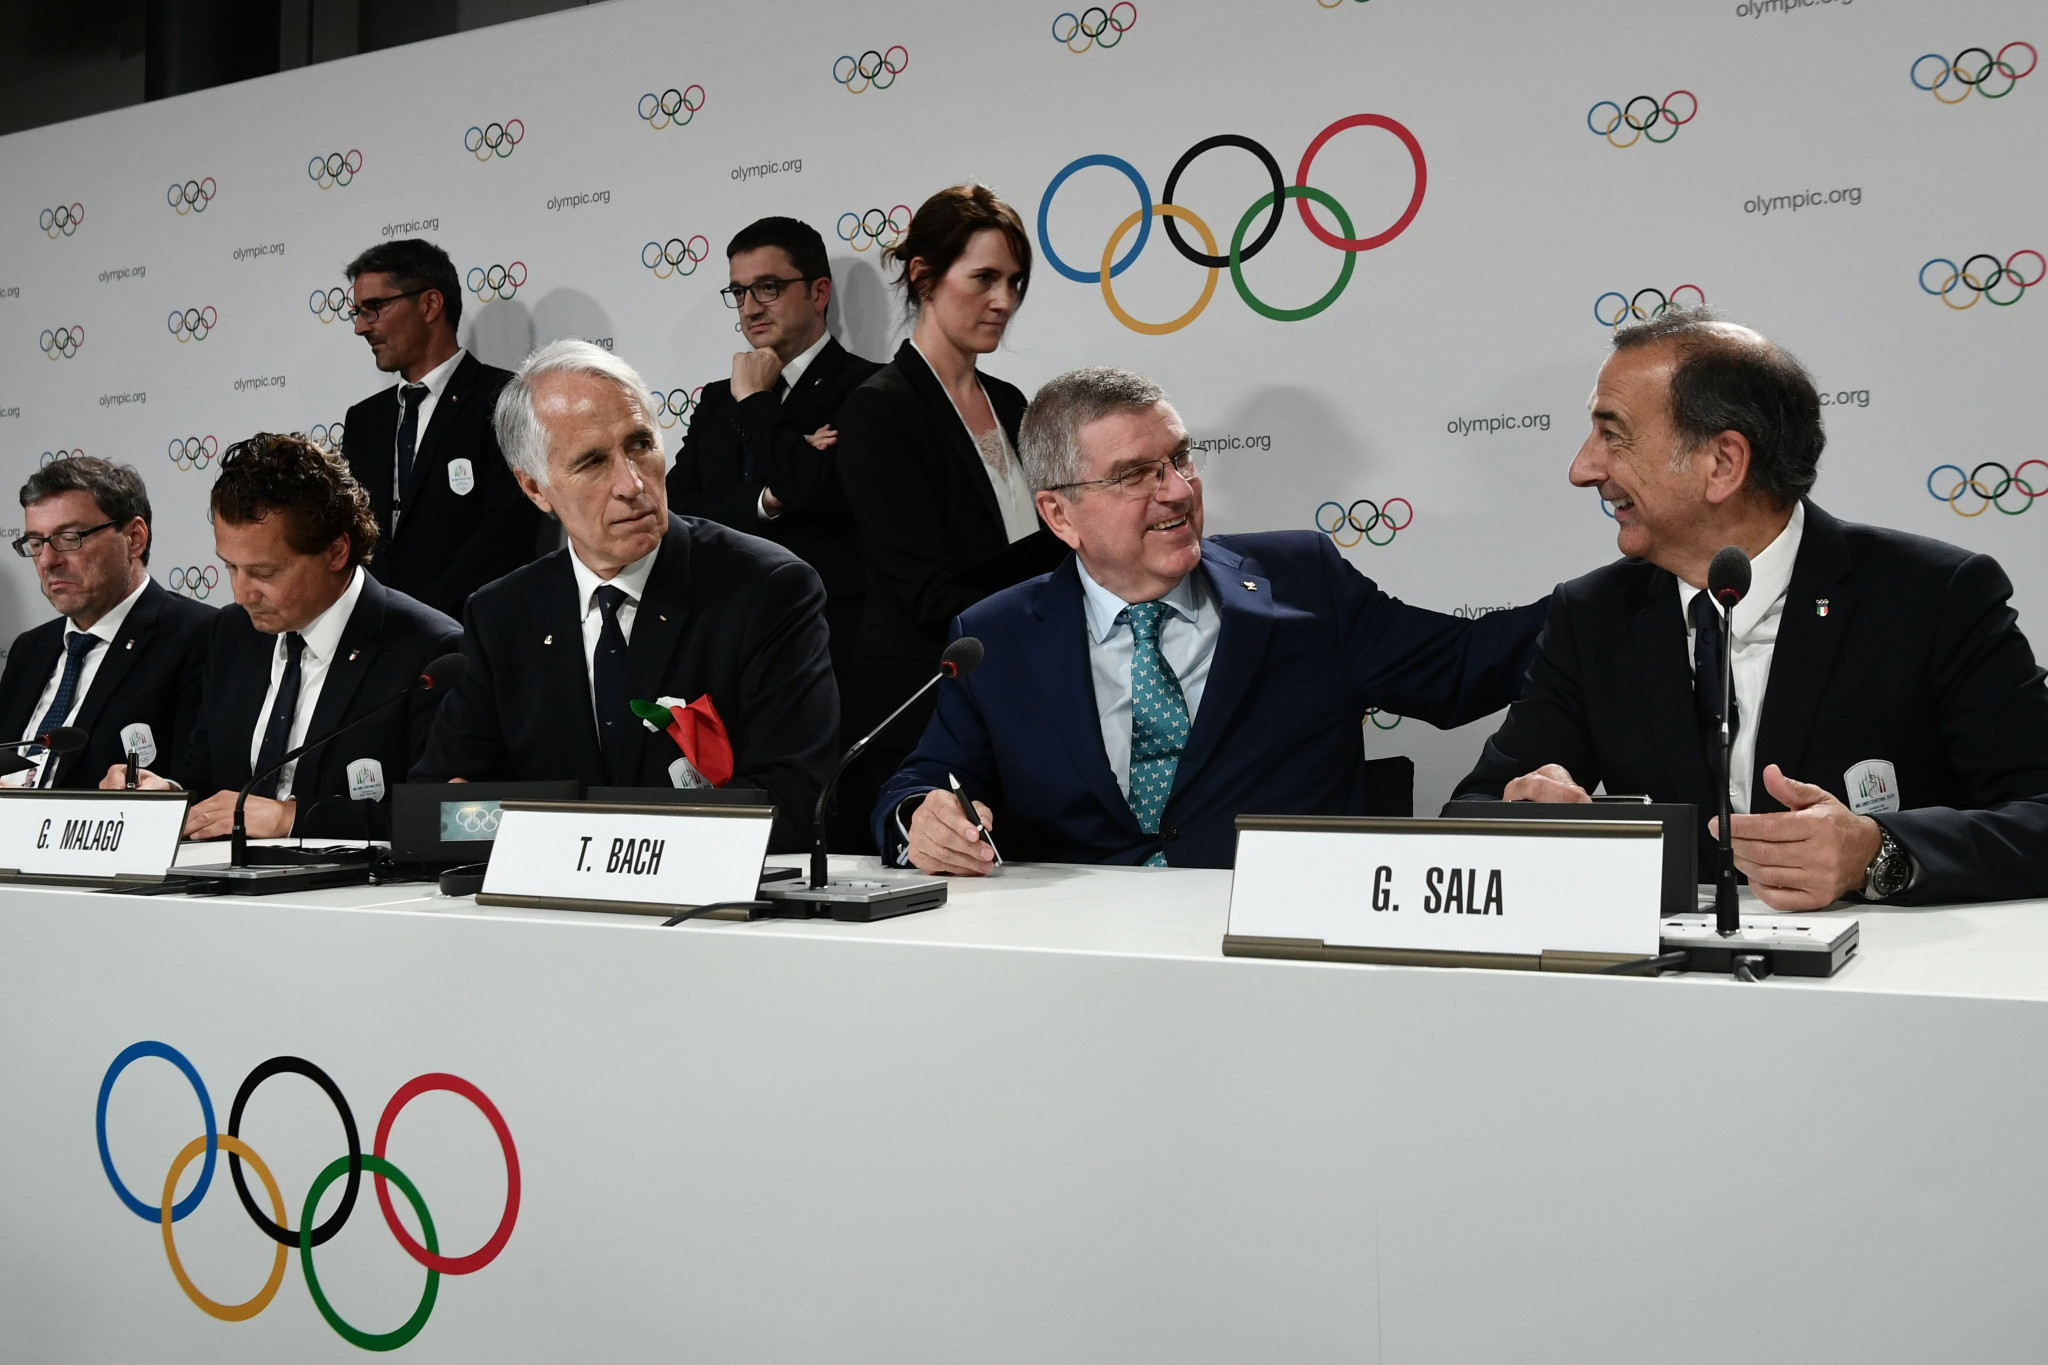 IOC President Thomas Bach, second from right, at last week's IOC Session